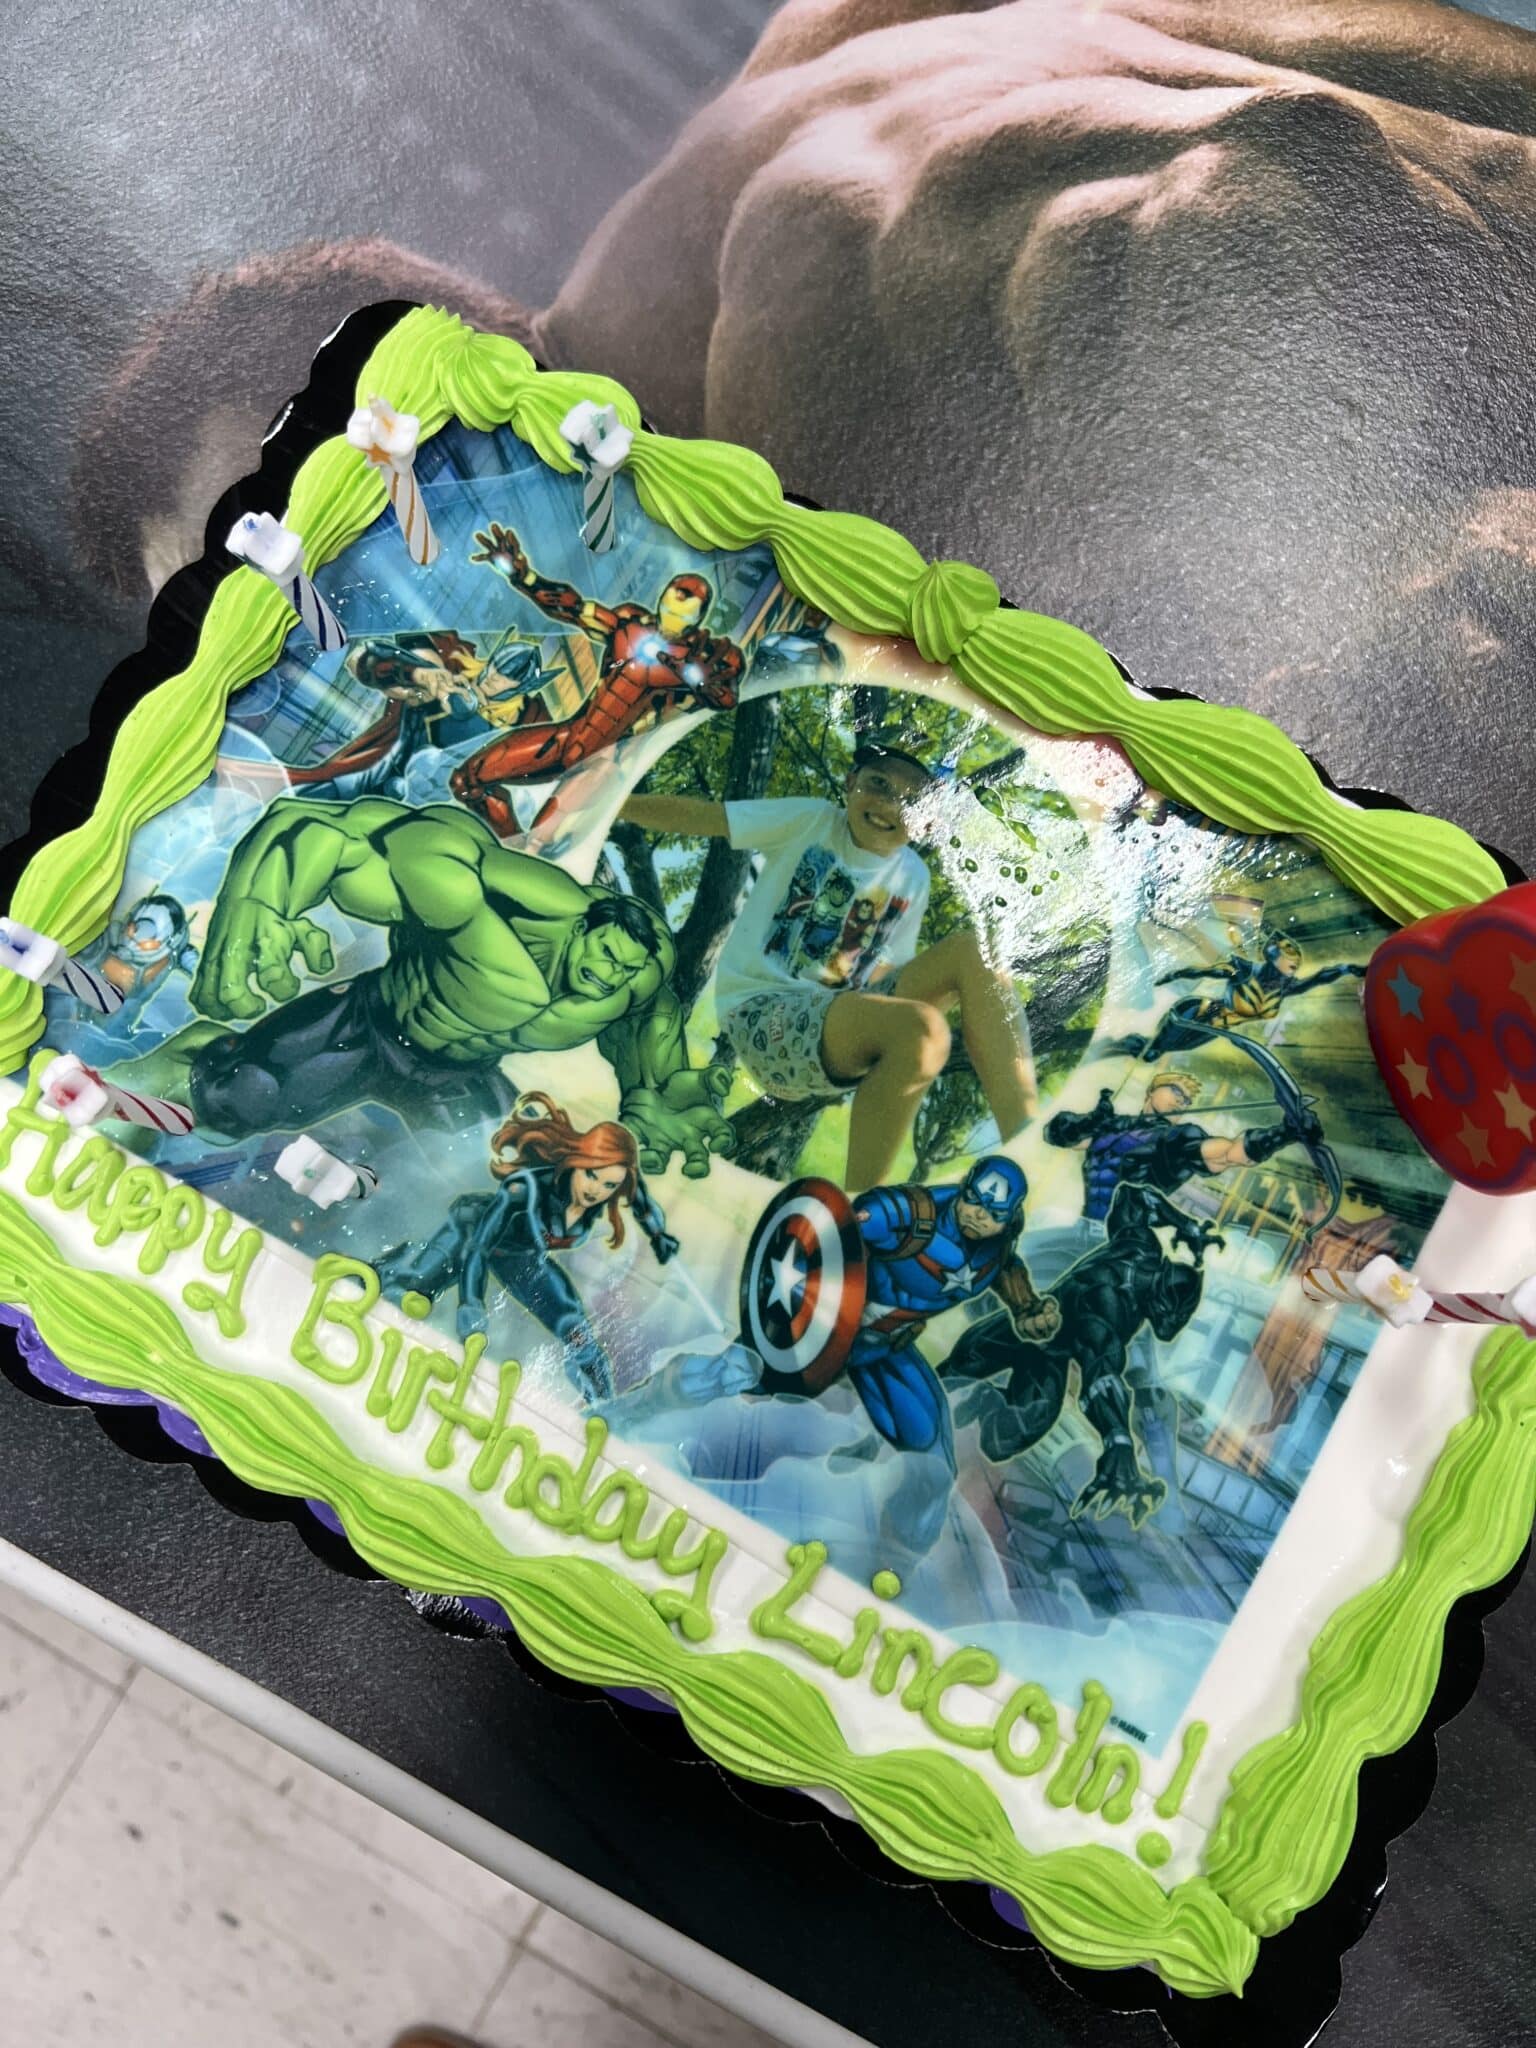 8 year old birthday, Rebounderz Grand Rapids, Avengers party, Lincoln Wey